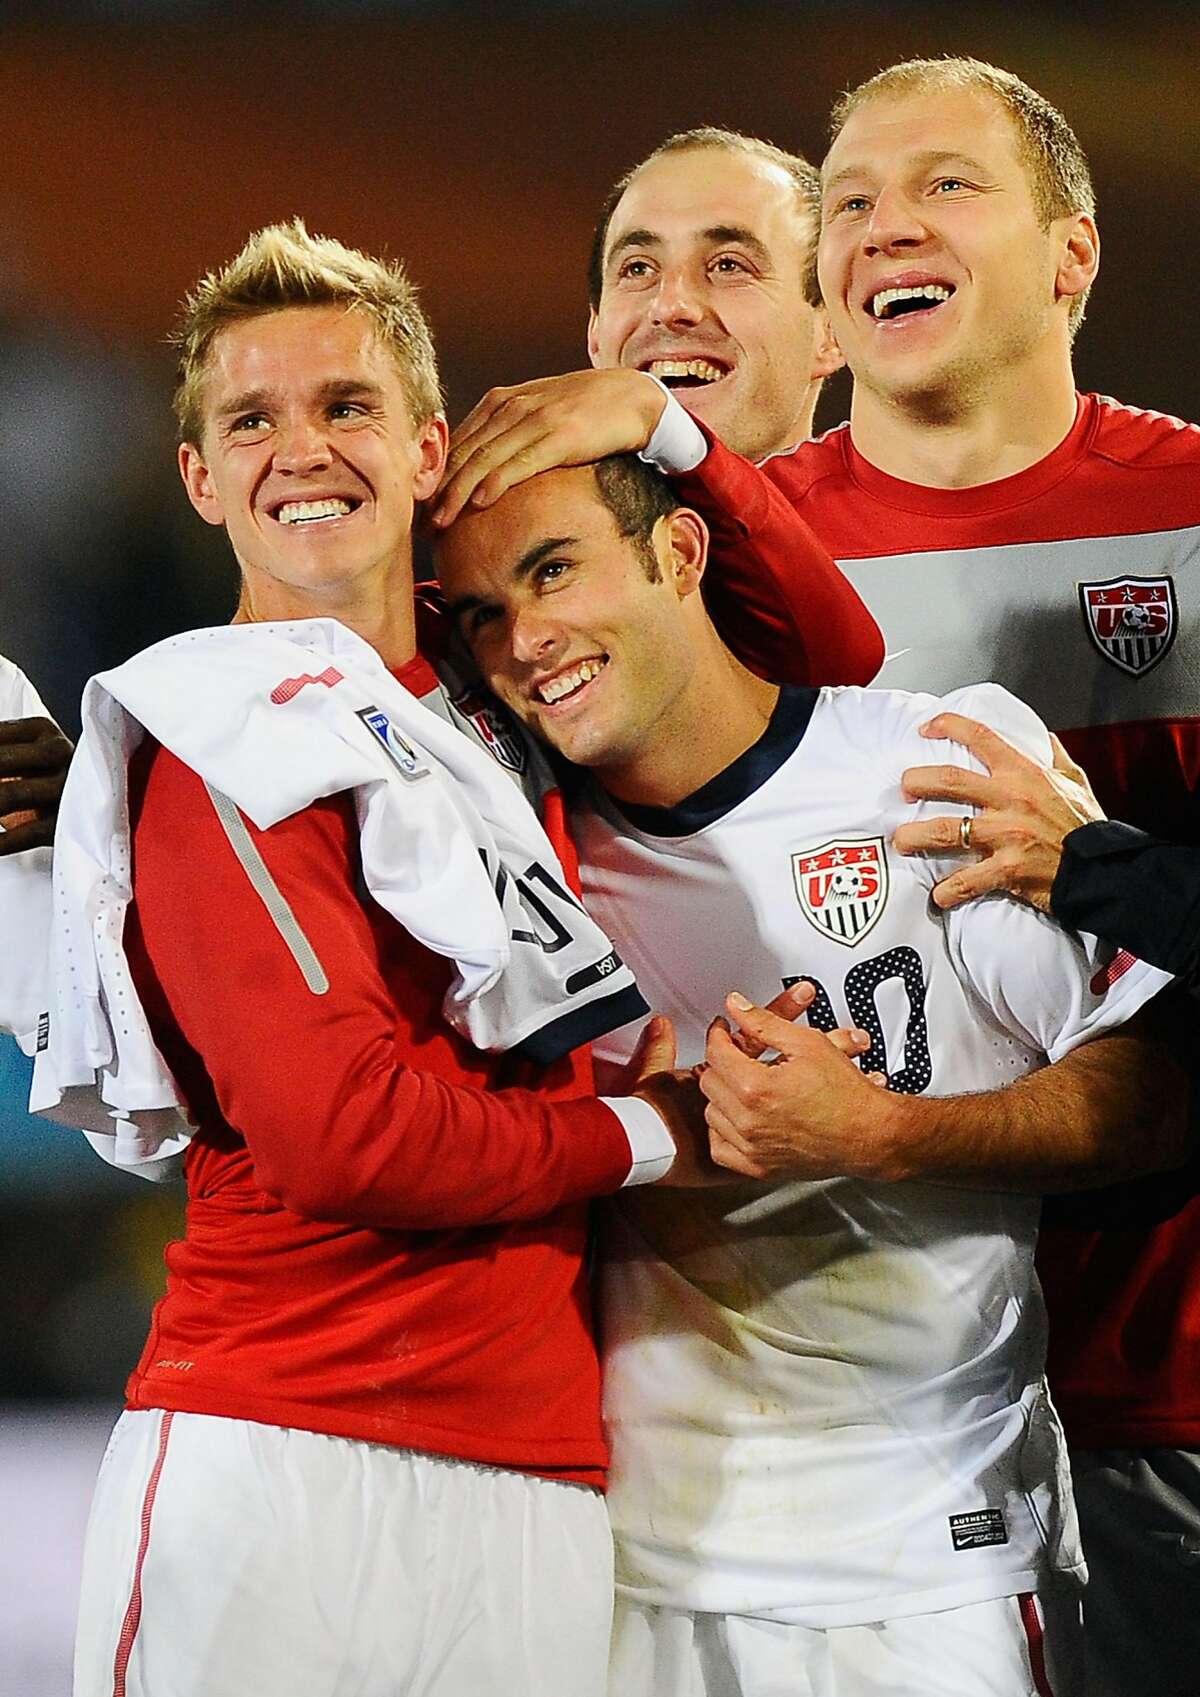 PRETORIA, SOUTH AFRICA - JUNE 23: Stuart Holden and Landon Donovan of the United States celebrate with team mates the victory that sends the USA through to the second round in the 2010 FIFA World Cup South Africa Group C match between USA and Algeria at the Loftus Versfeld Stadium on June 23, 2010 in Tshwane/Pretoria, South Africa. (Photo by Kevork Djansezian/Getty Images) *** Local Caption *** Stuart Holden;Landon Donovan